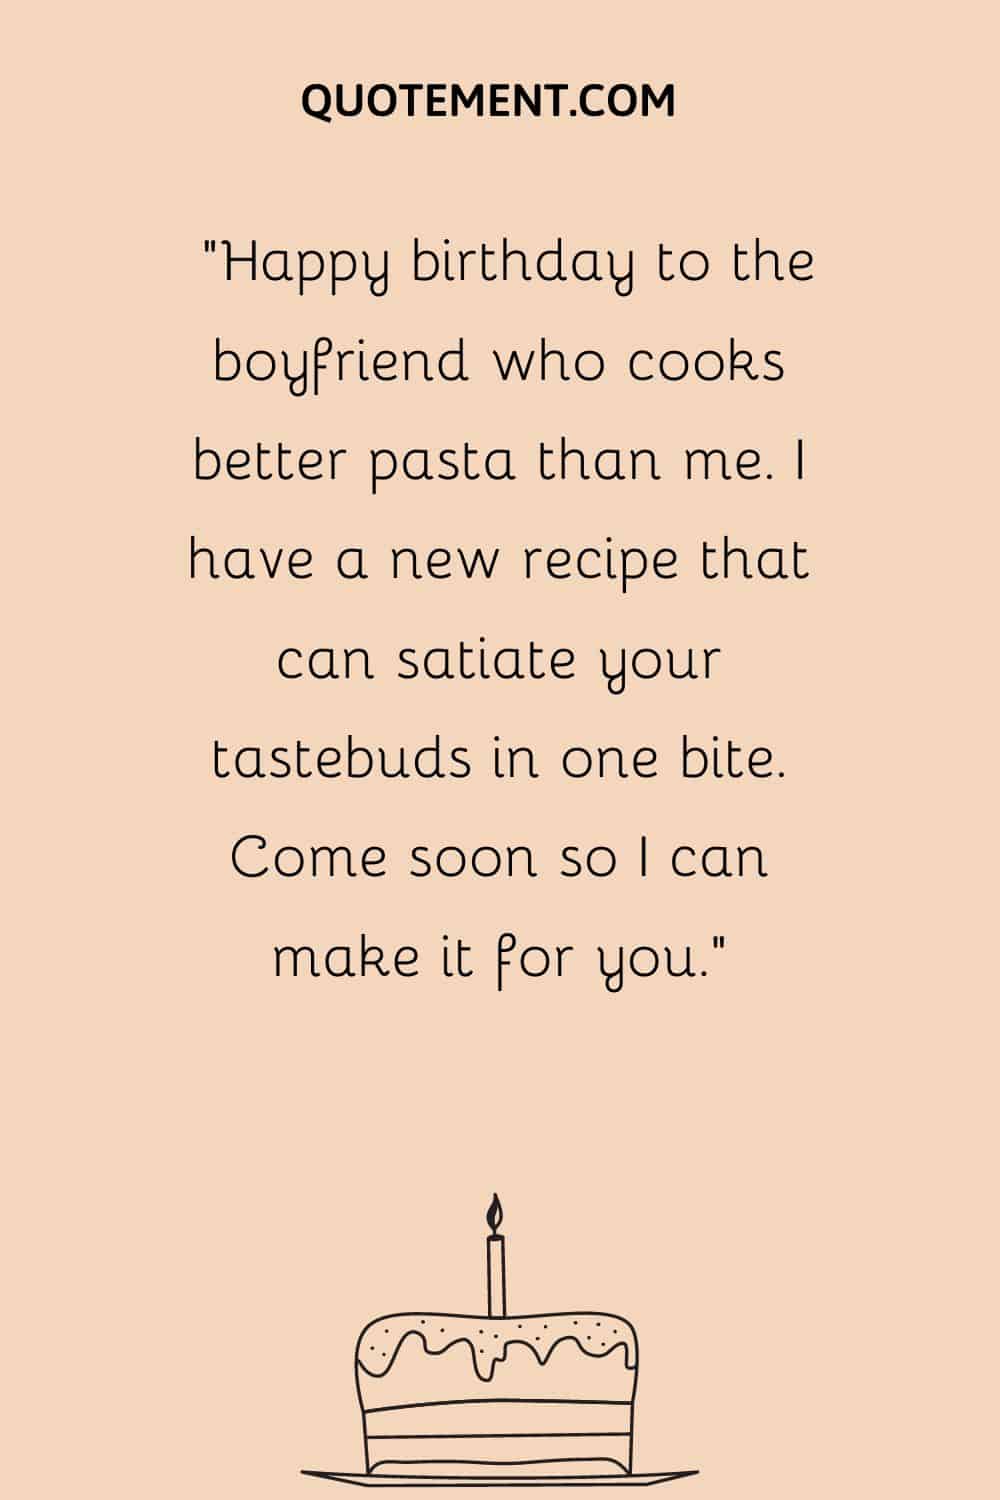 “Happy birthday to the boyfriend who cooks better pasta than me. I have a new recipe that can satiate your tastebuds in one bite. Come soon so I can make it for you.”
